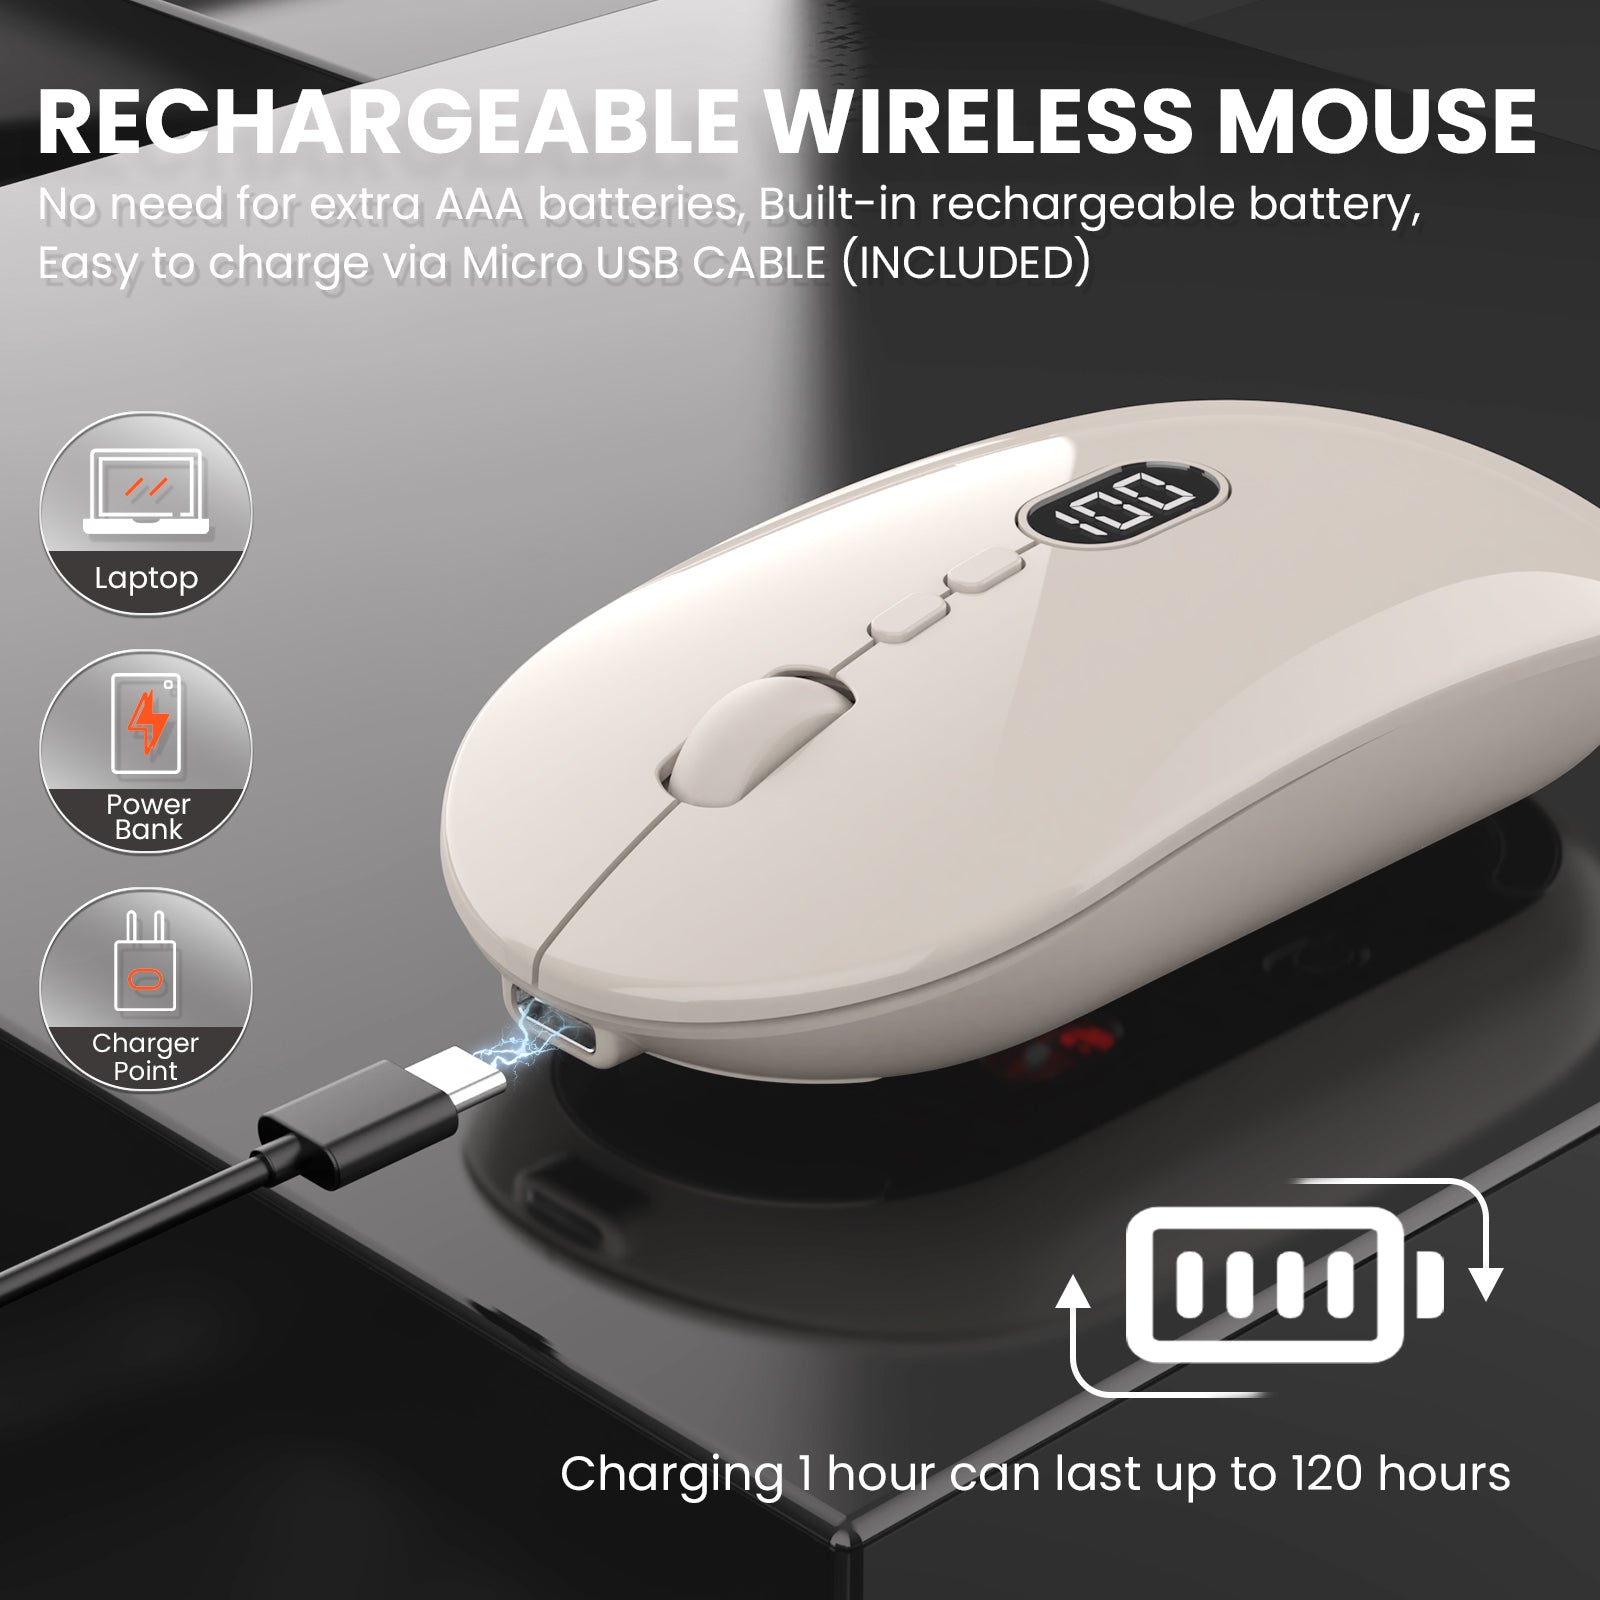 ZIYOU LANG X1 Wireless Lightweight Mouse with Battery Display Screen 2.4G Cordless Slim Mice for Laptop Silent Click Computer Mouse